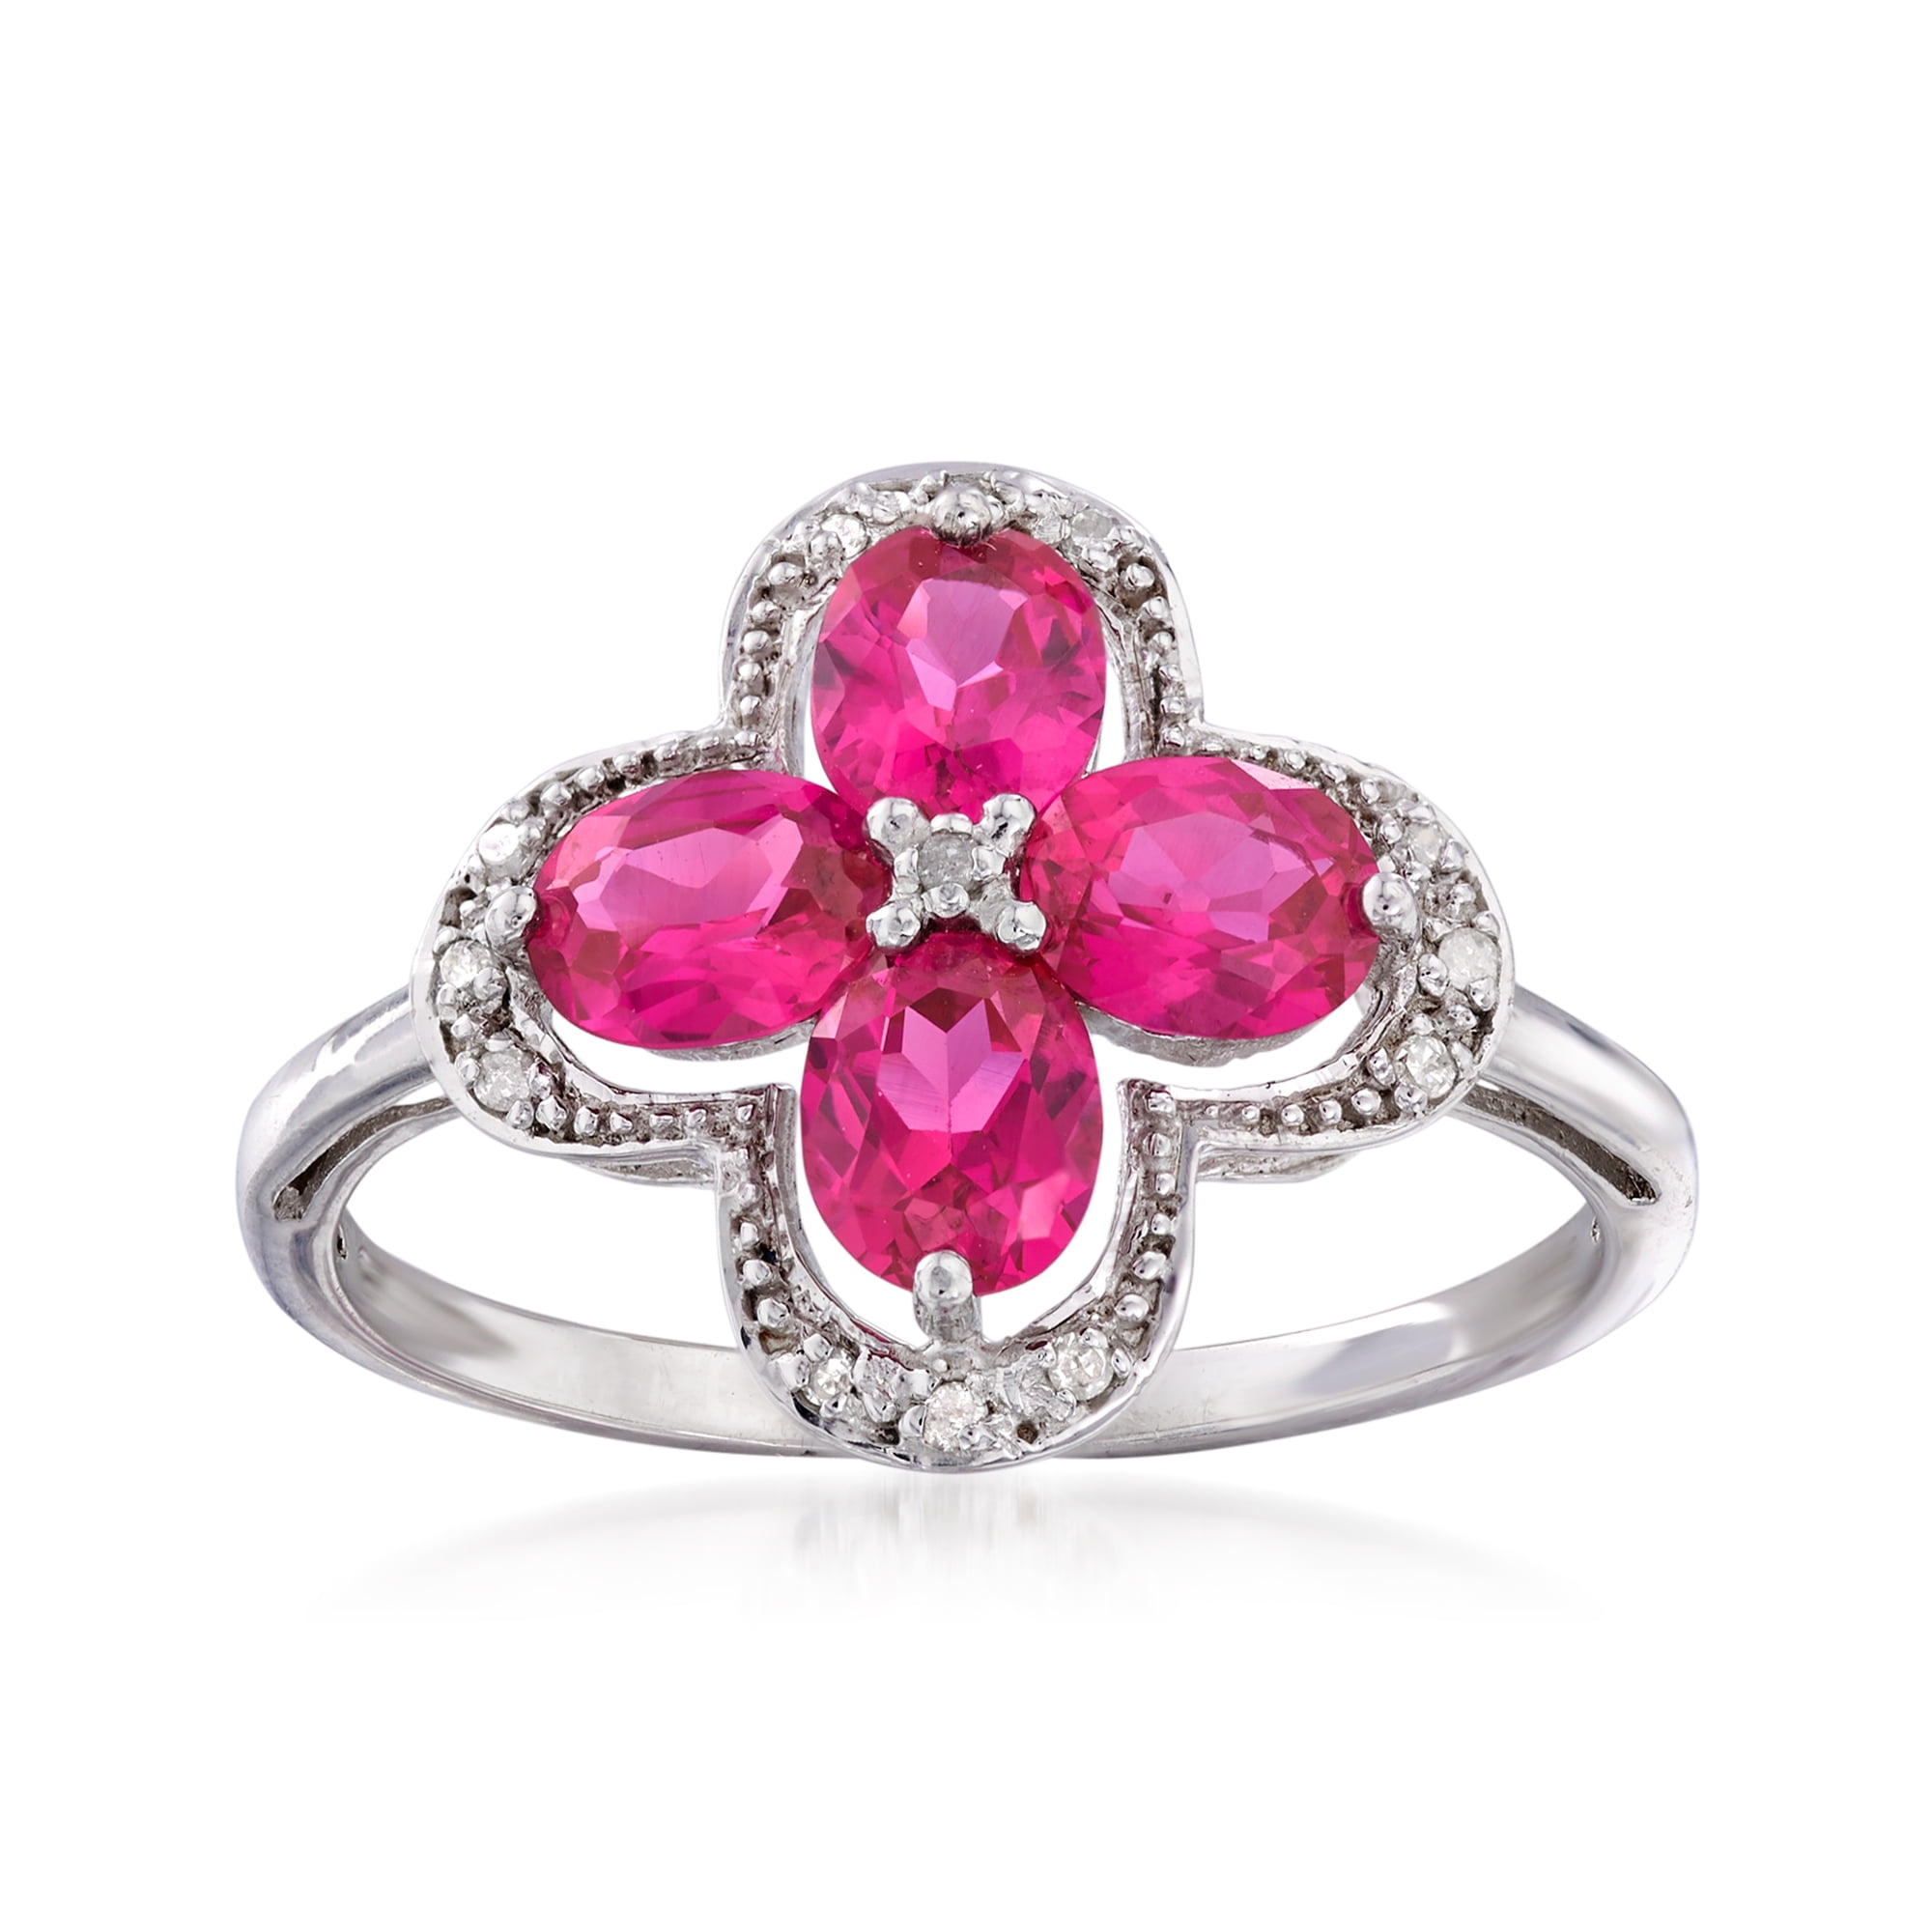 Ross-Simons - Ross-Simons 0.70 ct. t.w. Simulated Ruby Ring in Sterling ...